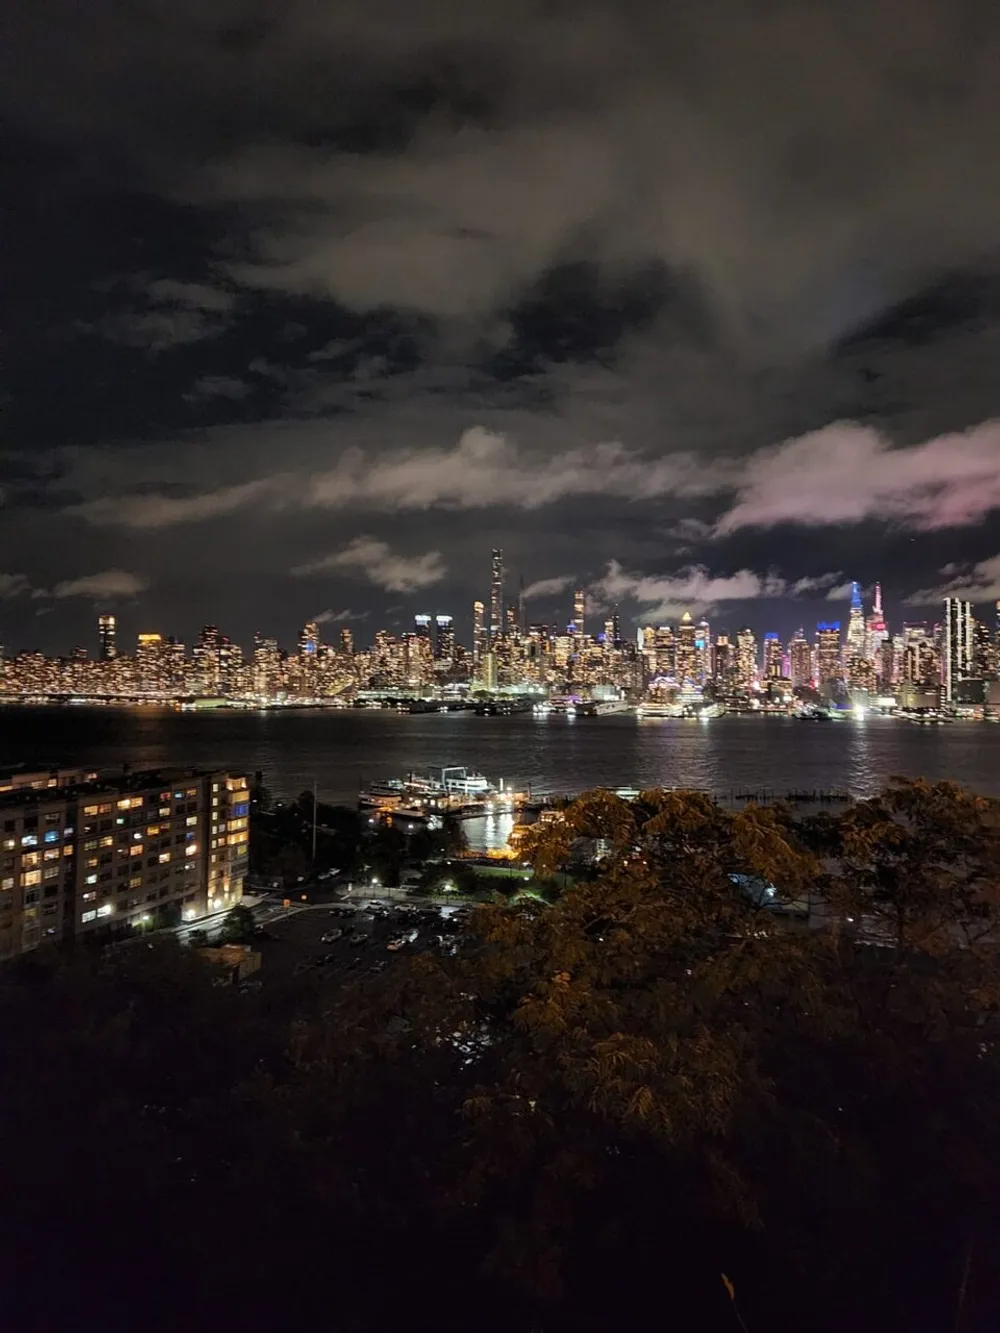 The image shows a vibrant nighttime view of a city skyline across a body of water under a cloudy sky with foreground vegetation partially framing the scene